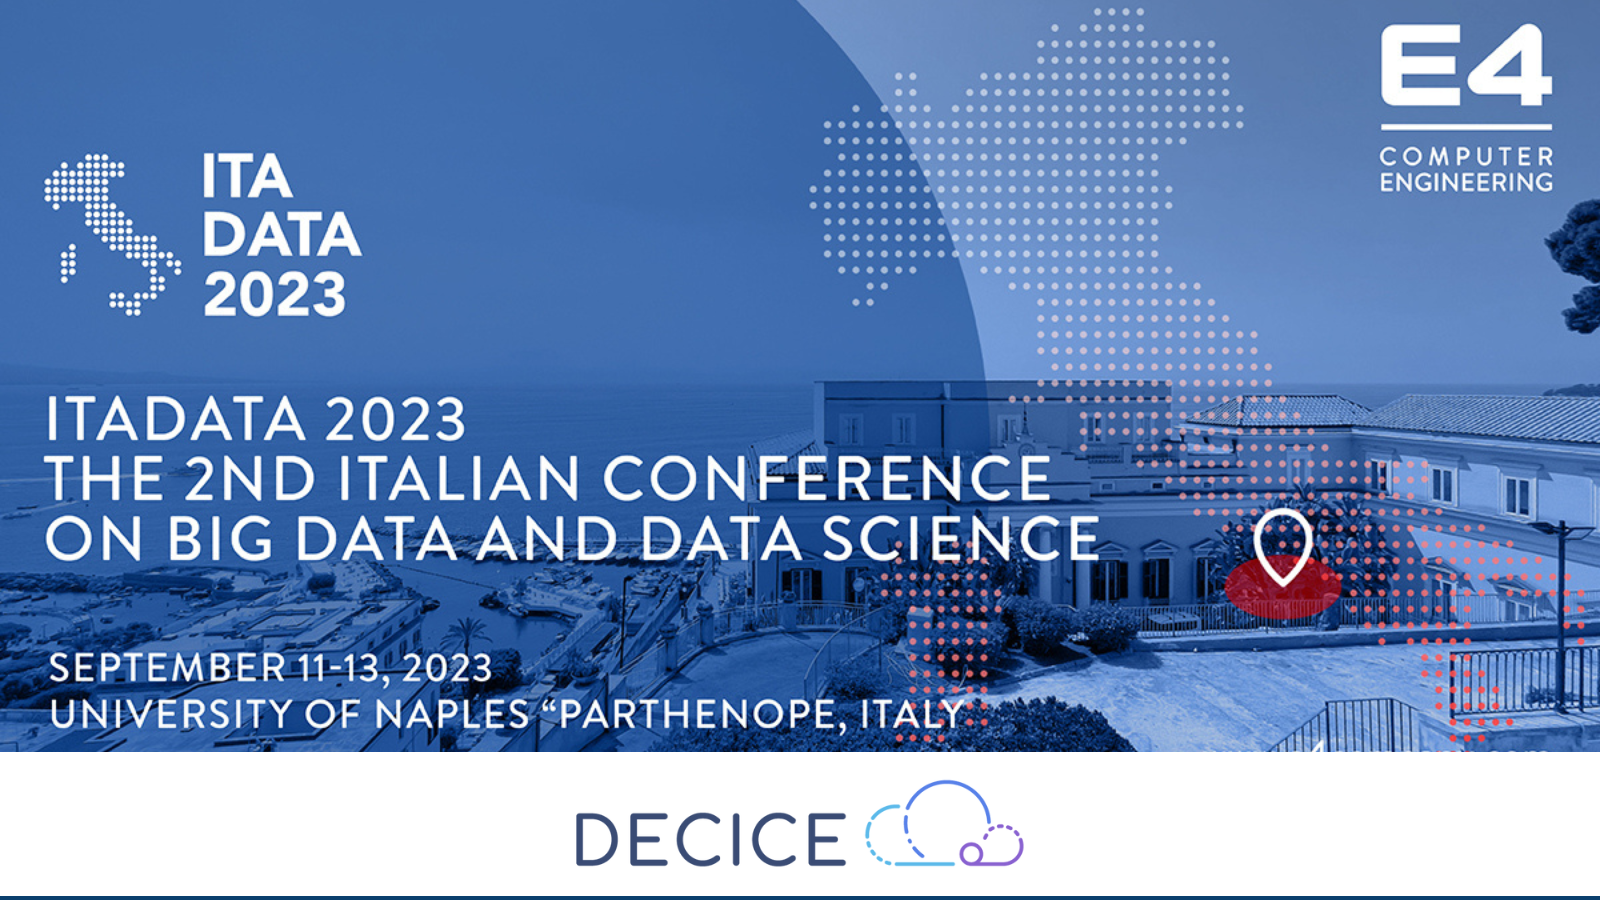 Presentation of DECICE Poster on the Italian Conference on Big Data and Data Science